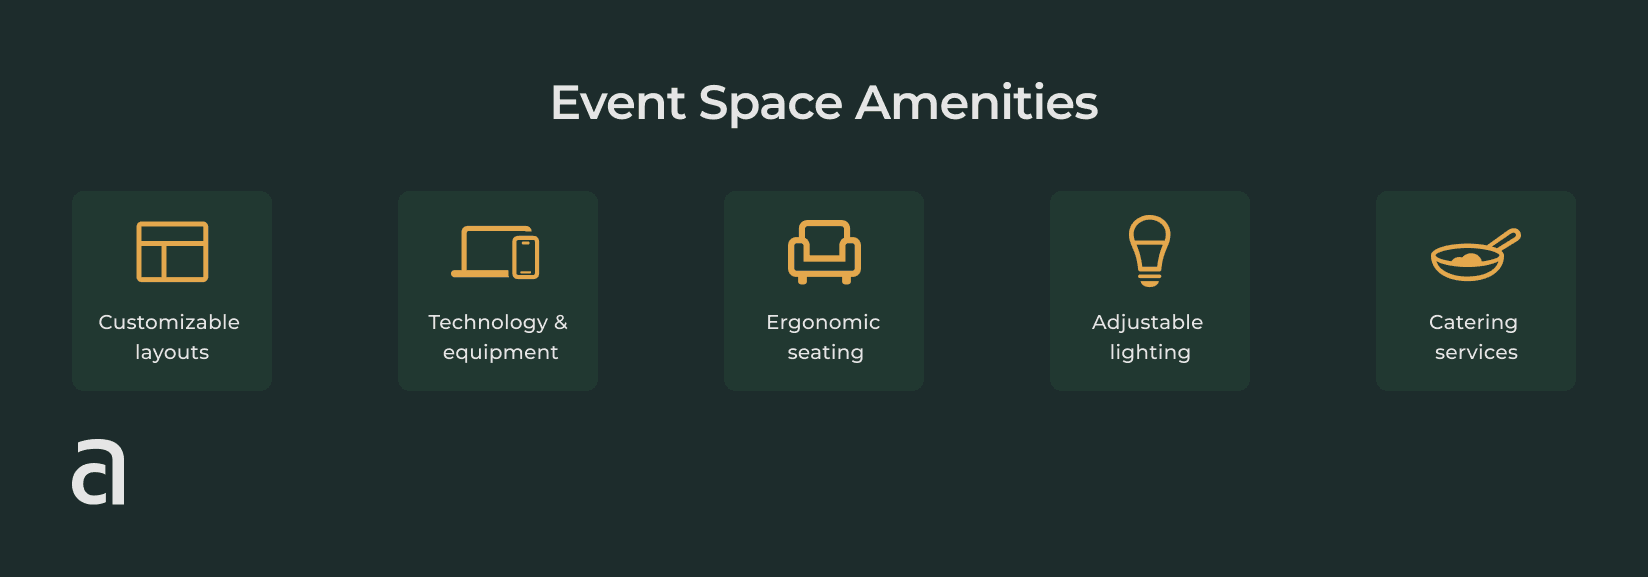 Event space amenities